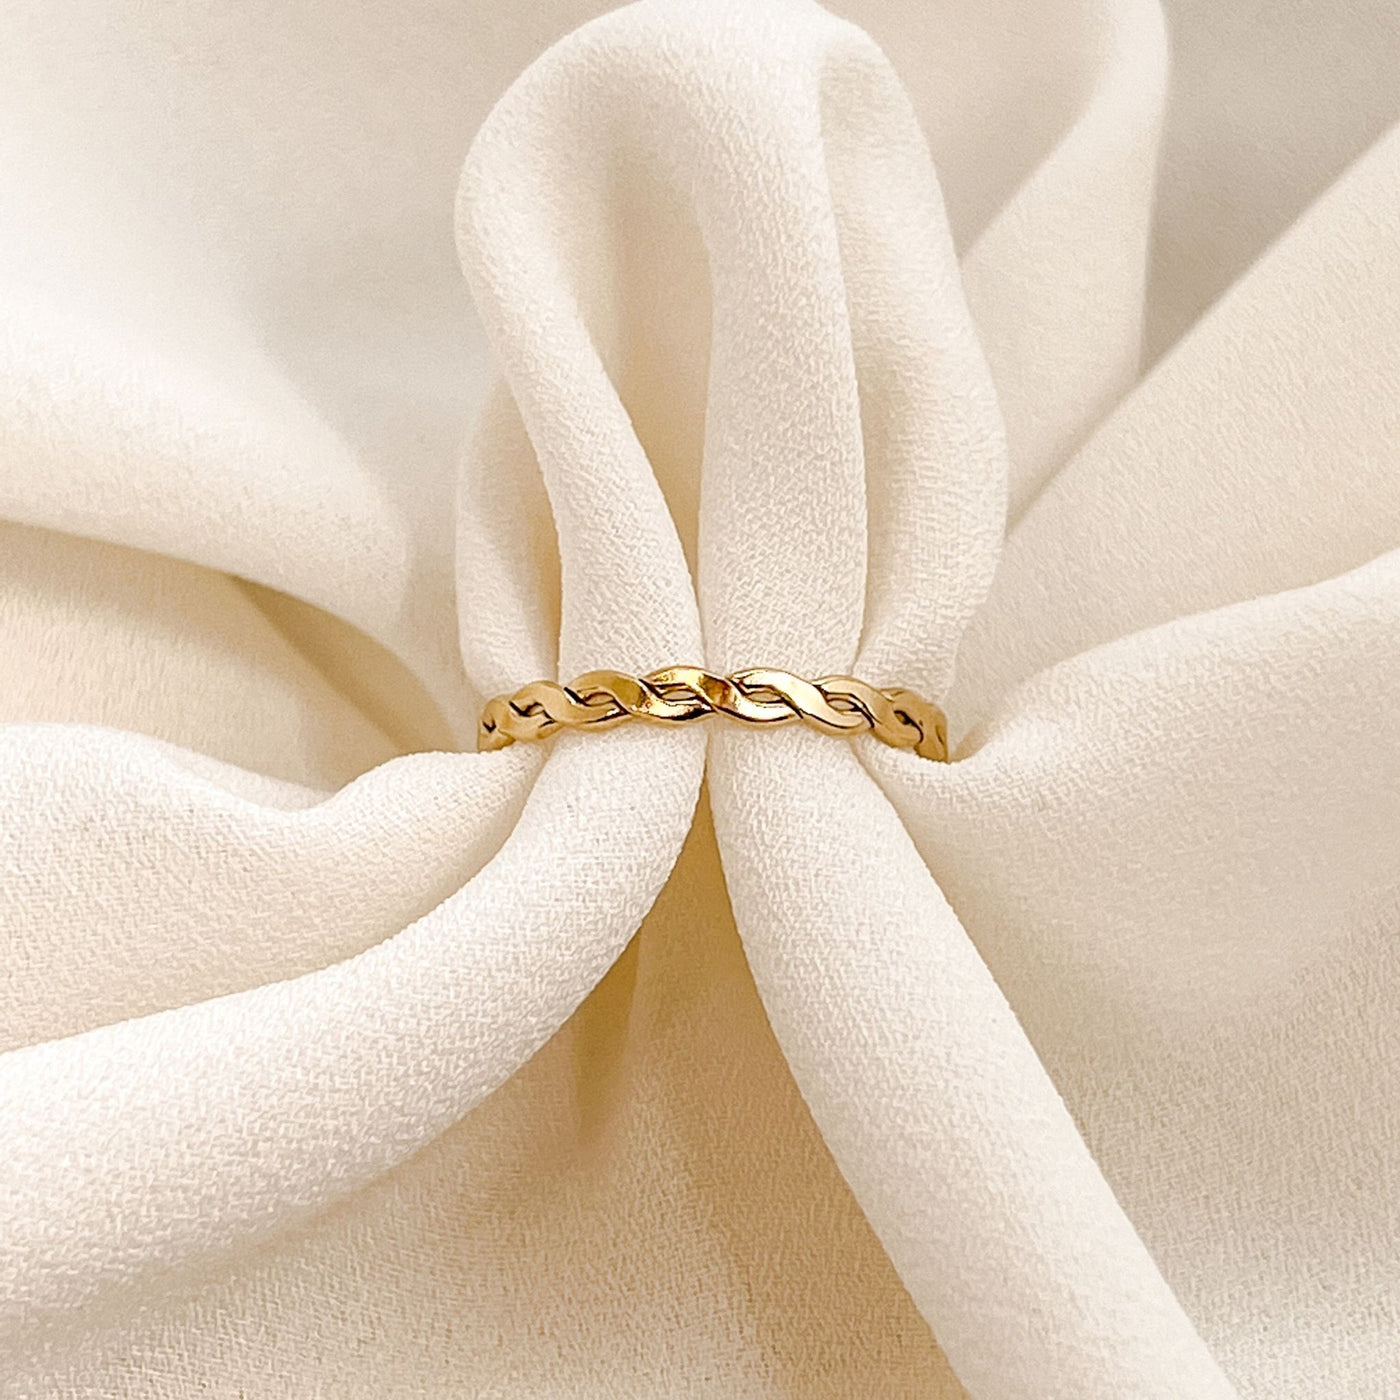 Highly polished 14K gold filled double braided women's stacking ring on cream coloured background